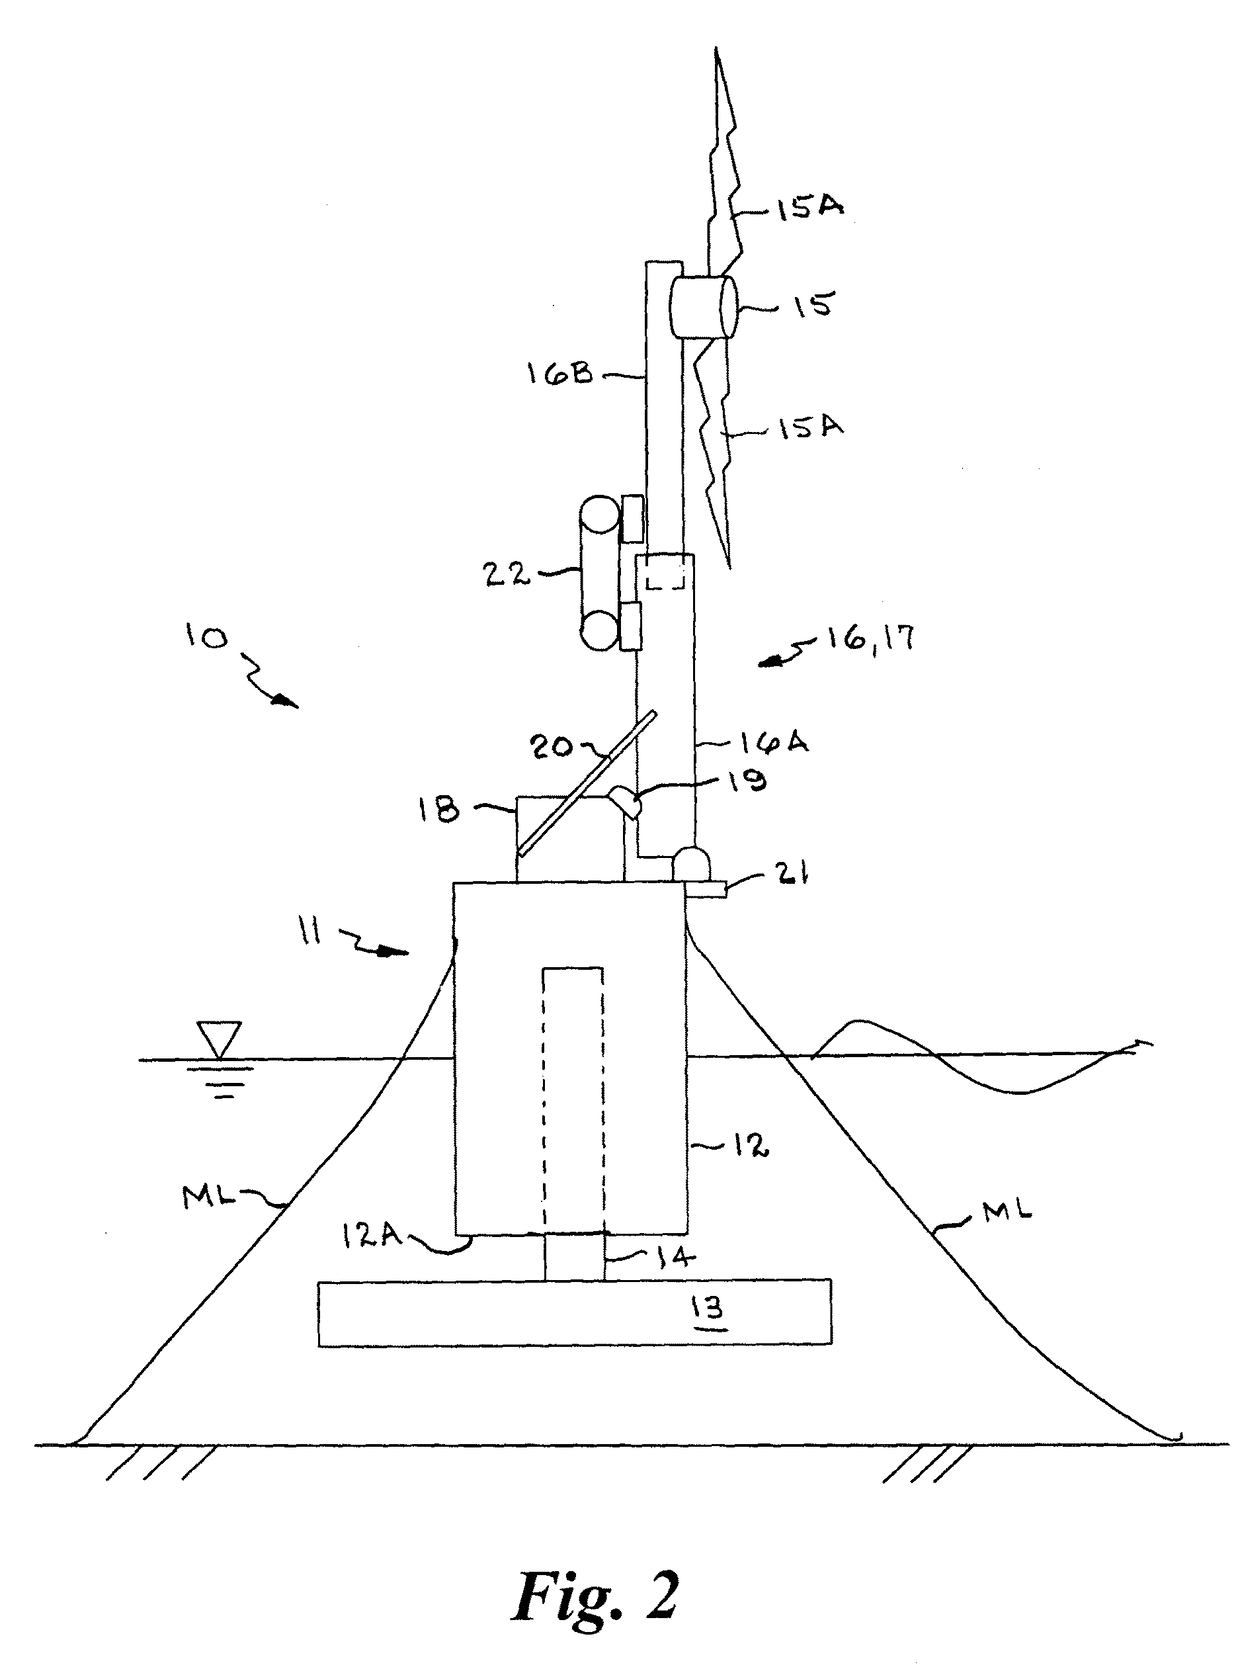 Self-installing column stabilized offshore wind turbine system and method of installation